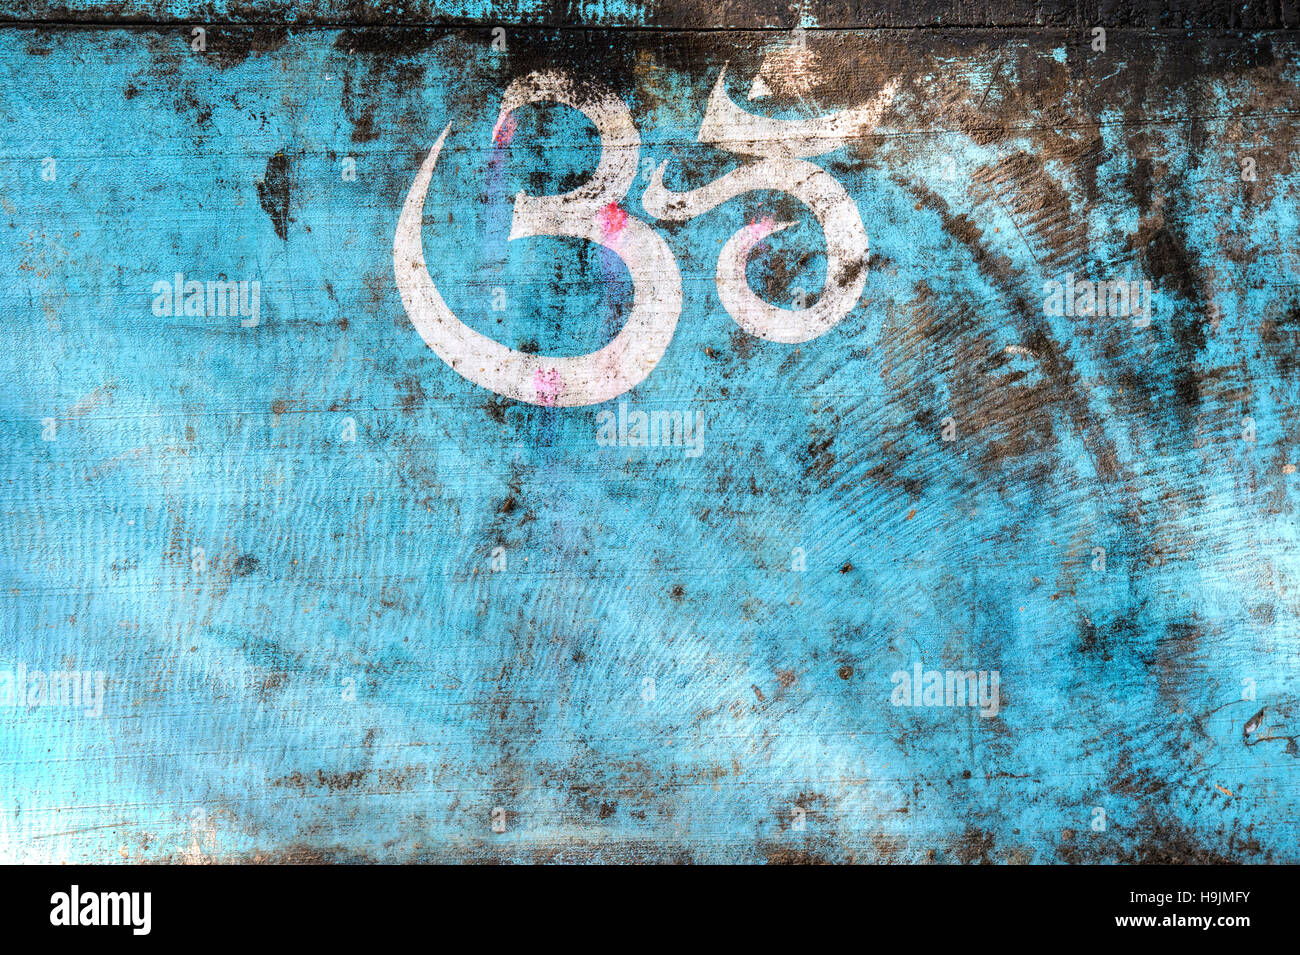 Painted Hindu OM / AUM symbol on an old blue indian cart. India Stock Photo